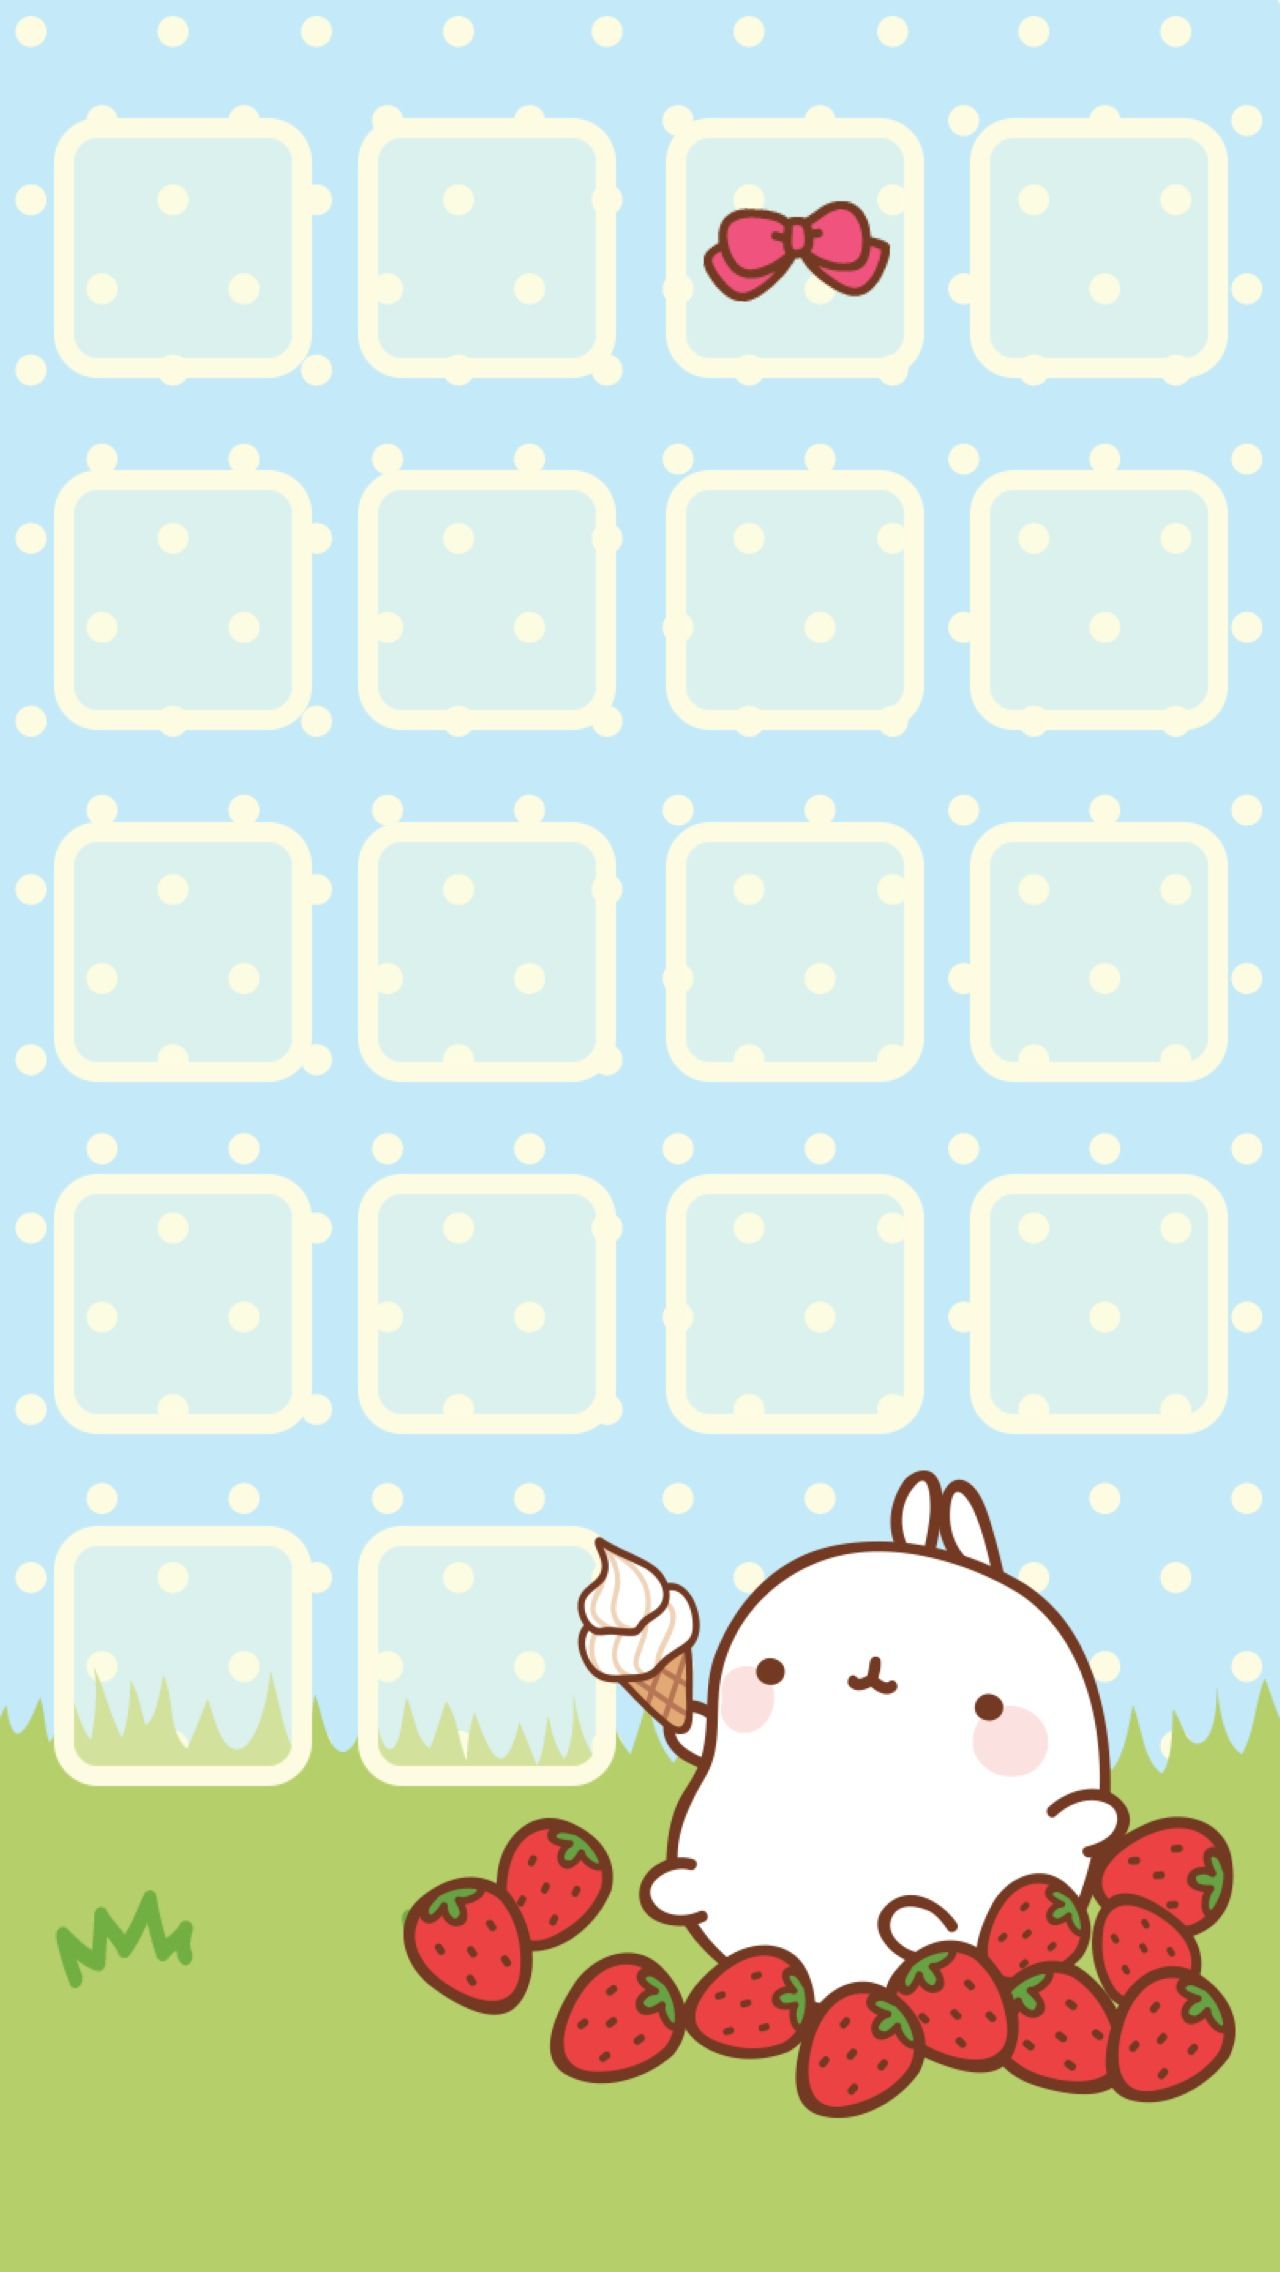 Molang Strawberry Home Screen. Wallpaper iphone cute, iPhone homescreen wallpaper, Kawaii wallpaper